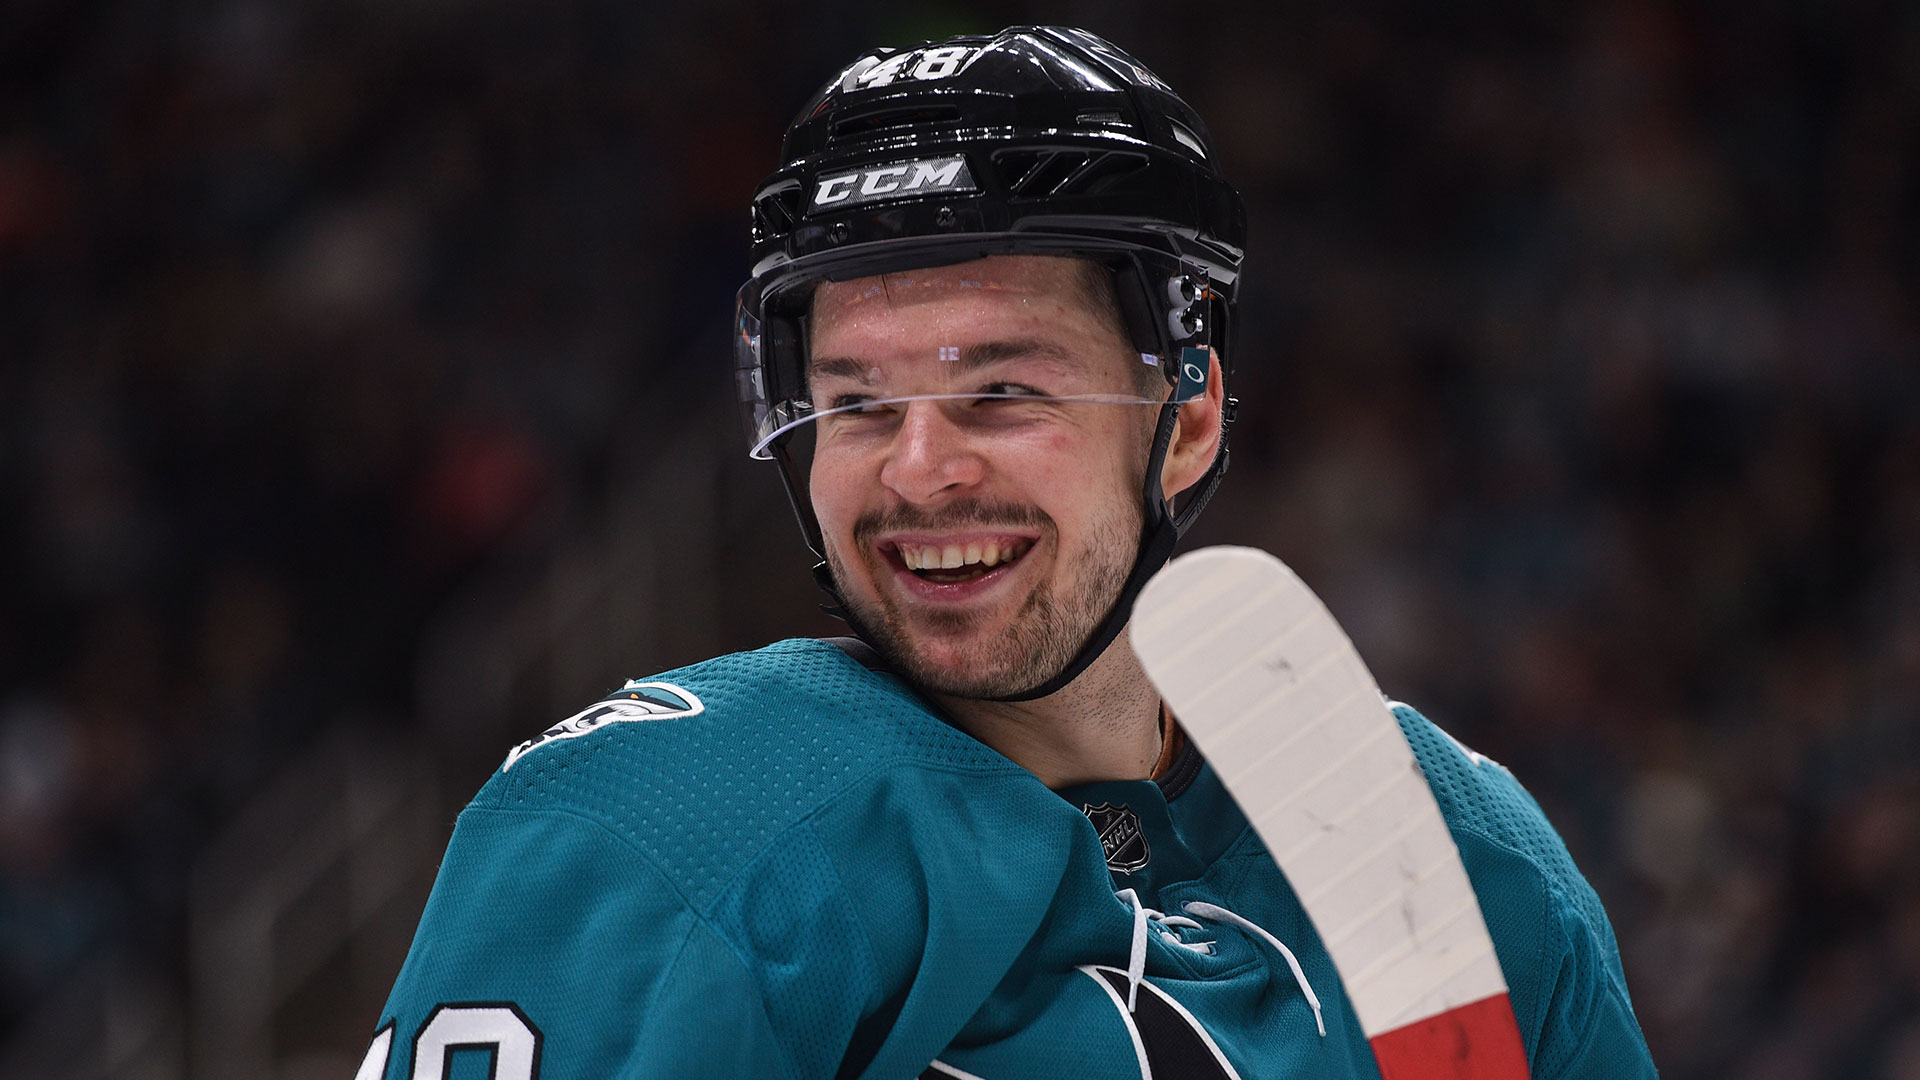 Tomas Hertl of the San Jose Sharks speaks to the media in a press